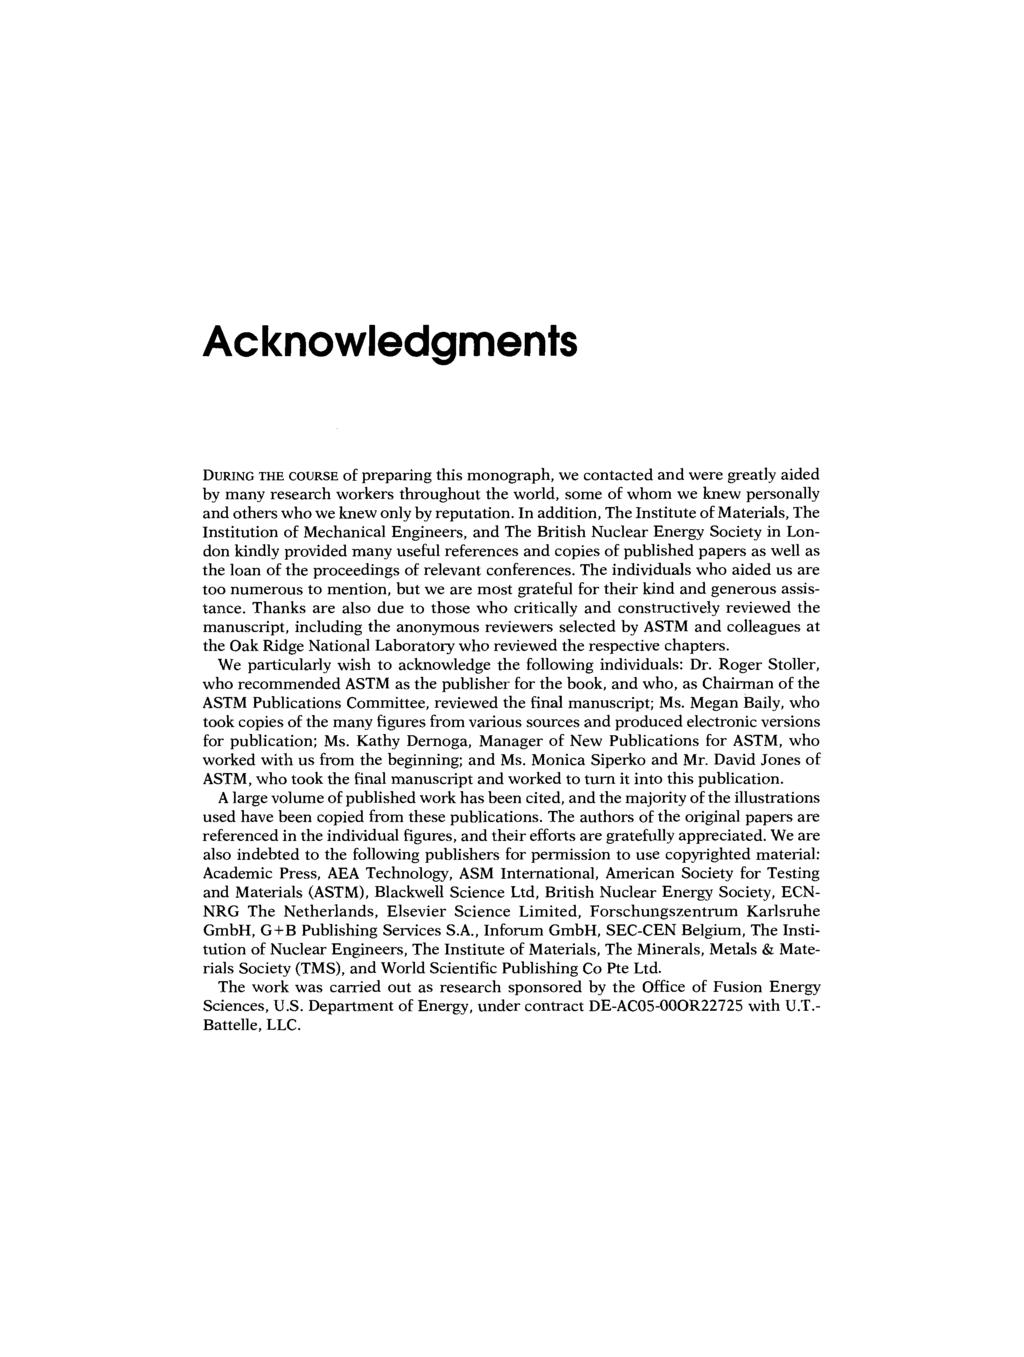 Acknowledgments DURING THE COURSE of preparing this monograph, we contacted and were greatly aided by many research workers throughout the world, some of whom we knew personally and others who we